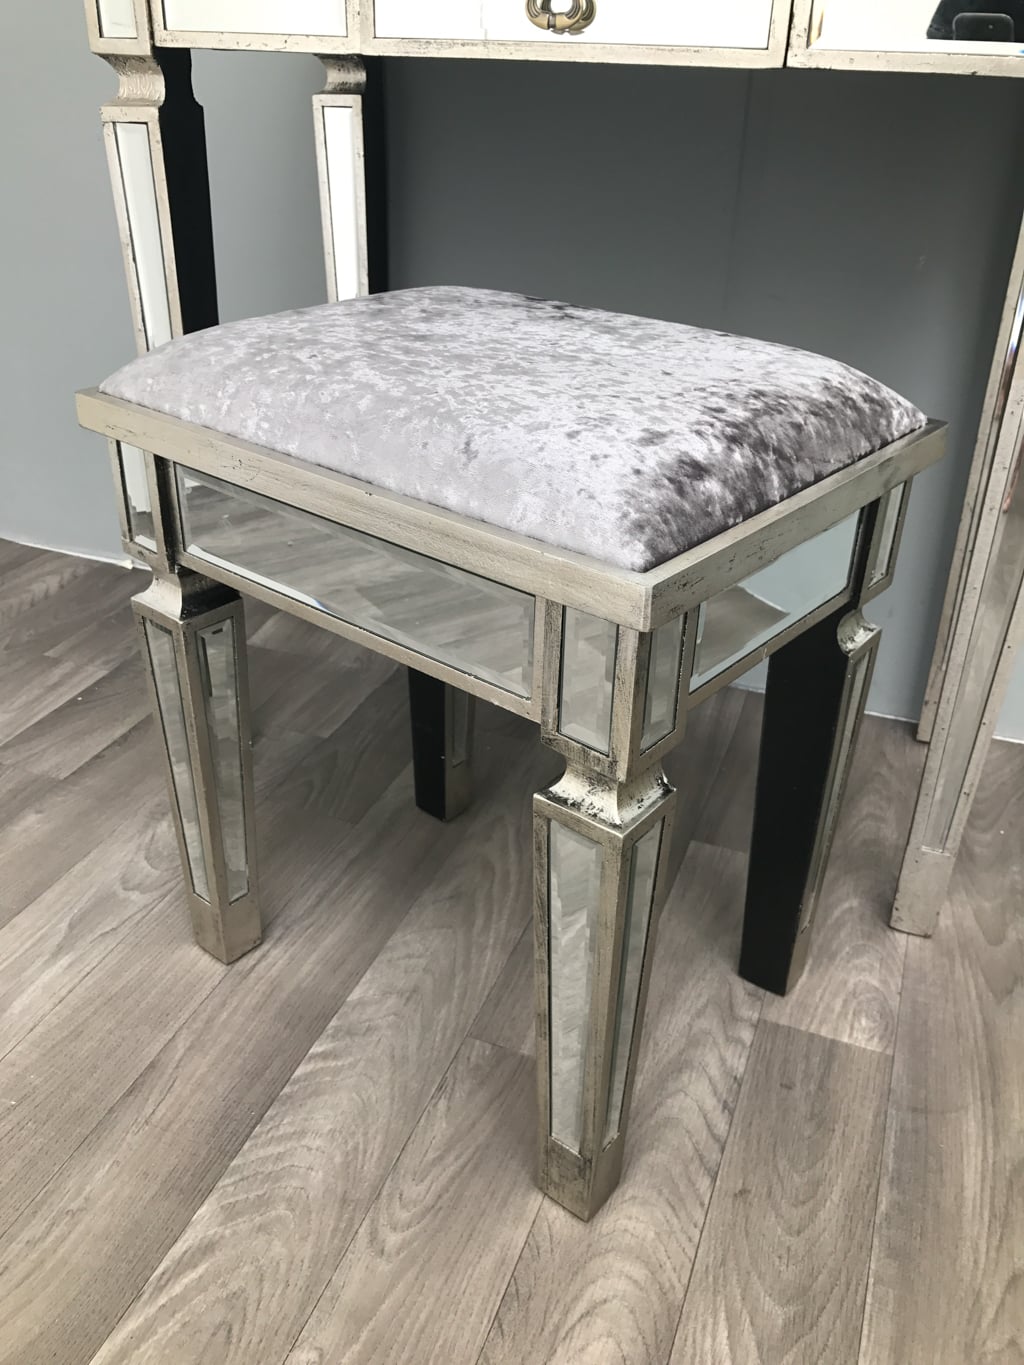 Mirrored Stool for Vanity Dressing Table